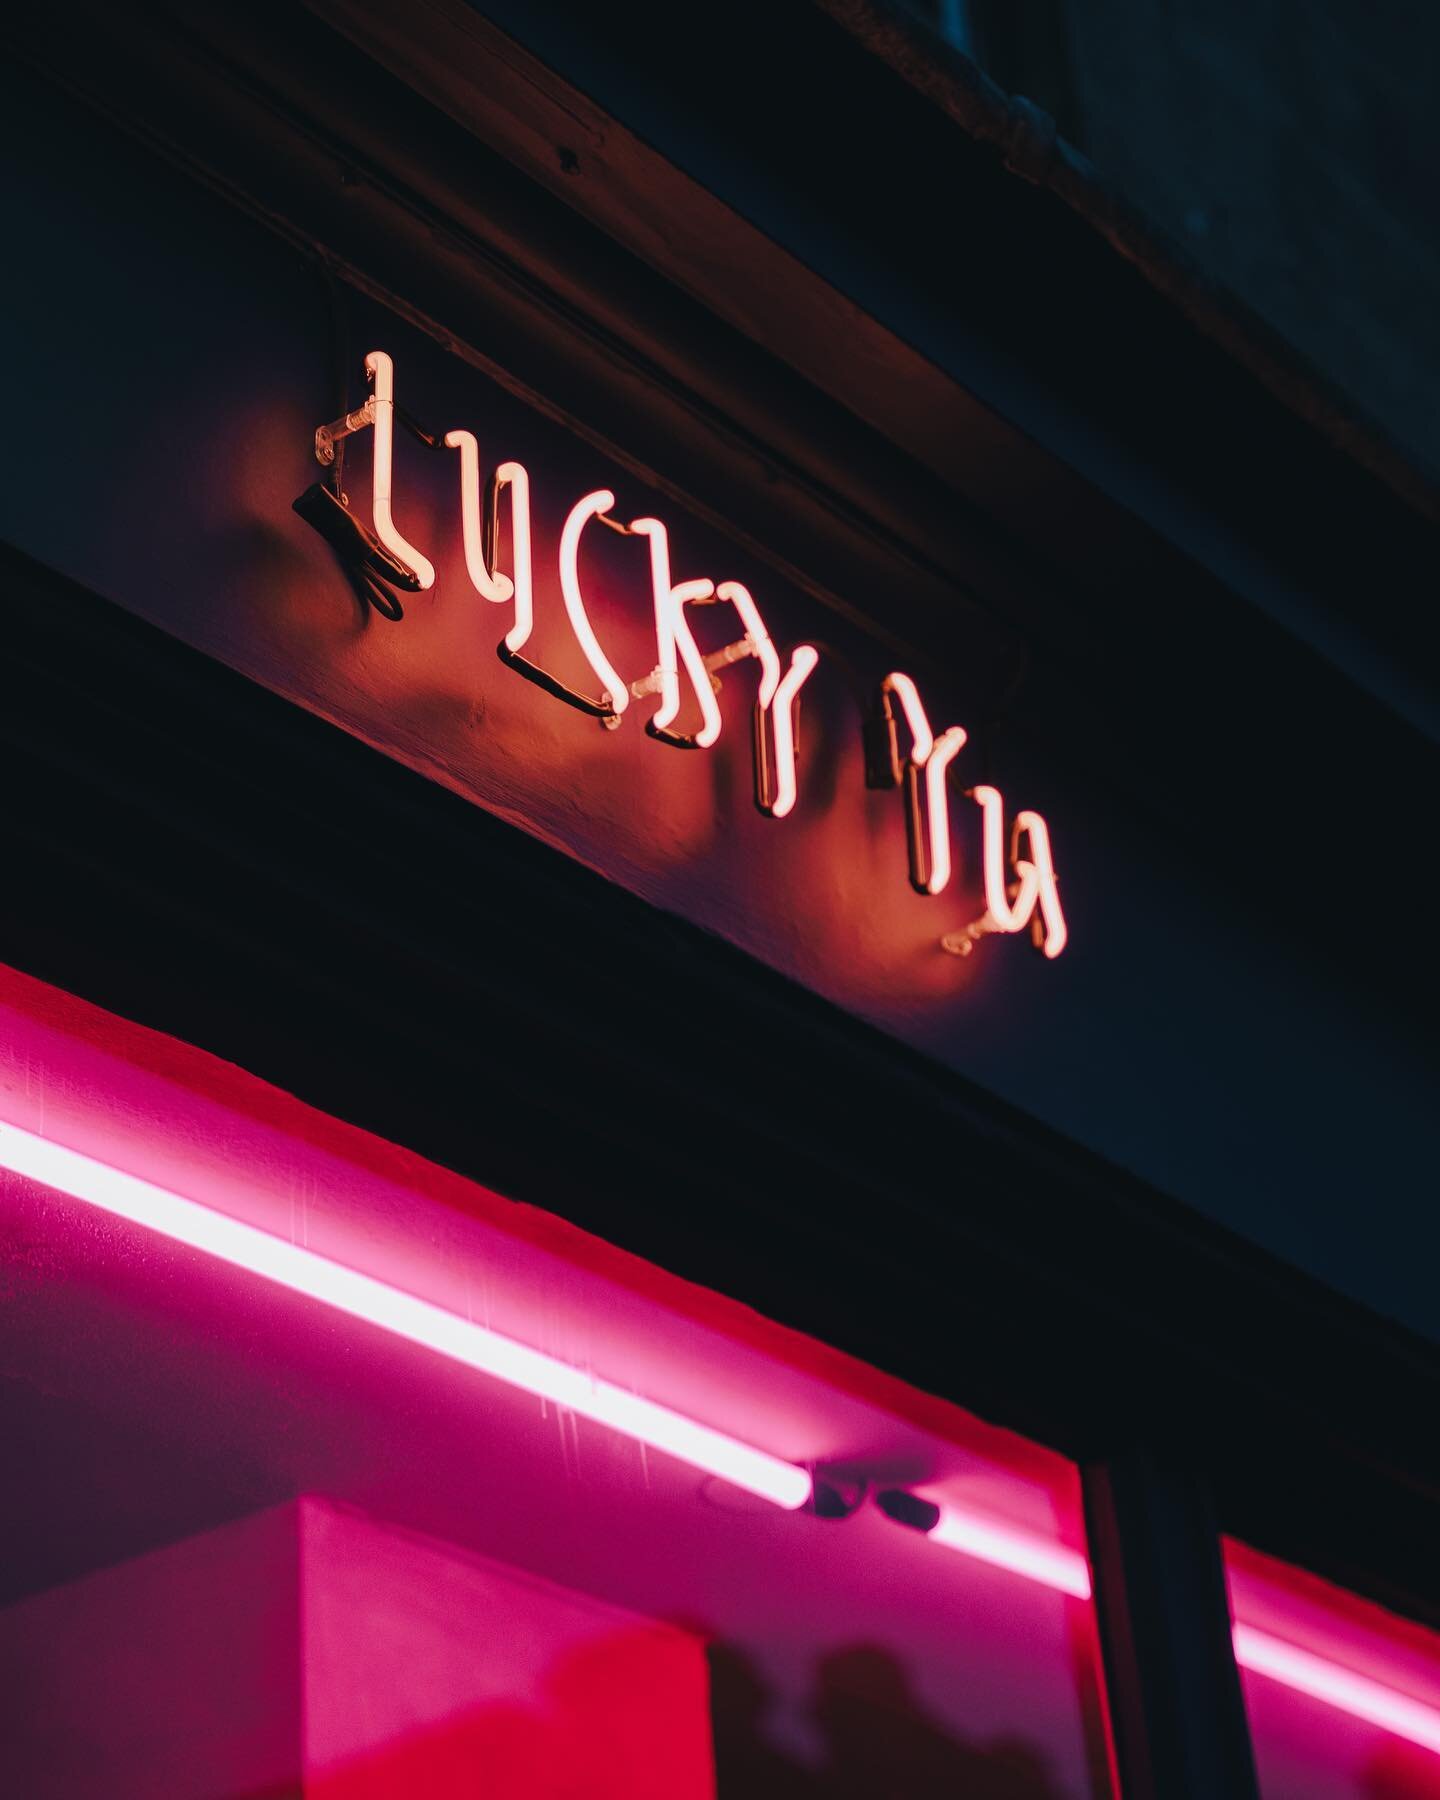 🤞🏼LUCKY YU - LUCKY ME 🤞🏼
.
Fine stuff for local legends @luckyyuedinburgh . Their new place on Broughton St hit all the right notes - super vibey ⚡️.
.
Lightbox, a new Neon and an old Neon
.
Stay Lucky 🤞🏼
.
#signs #signage #neons #neonsign #neo